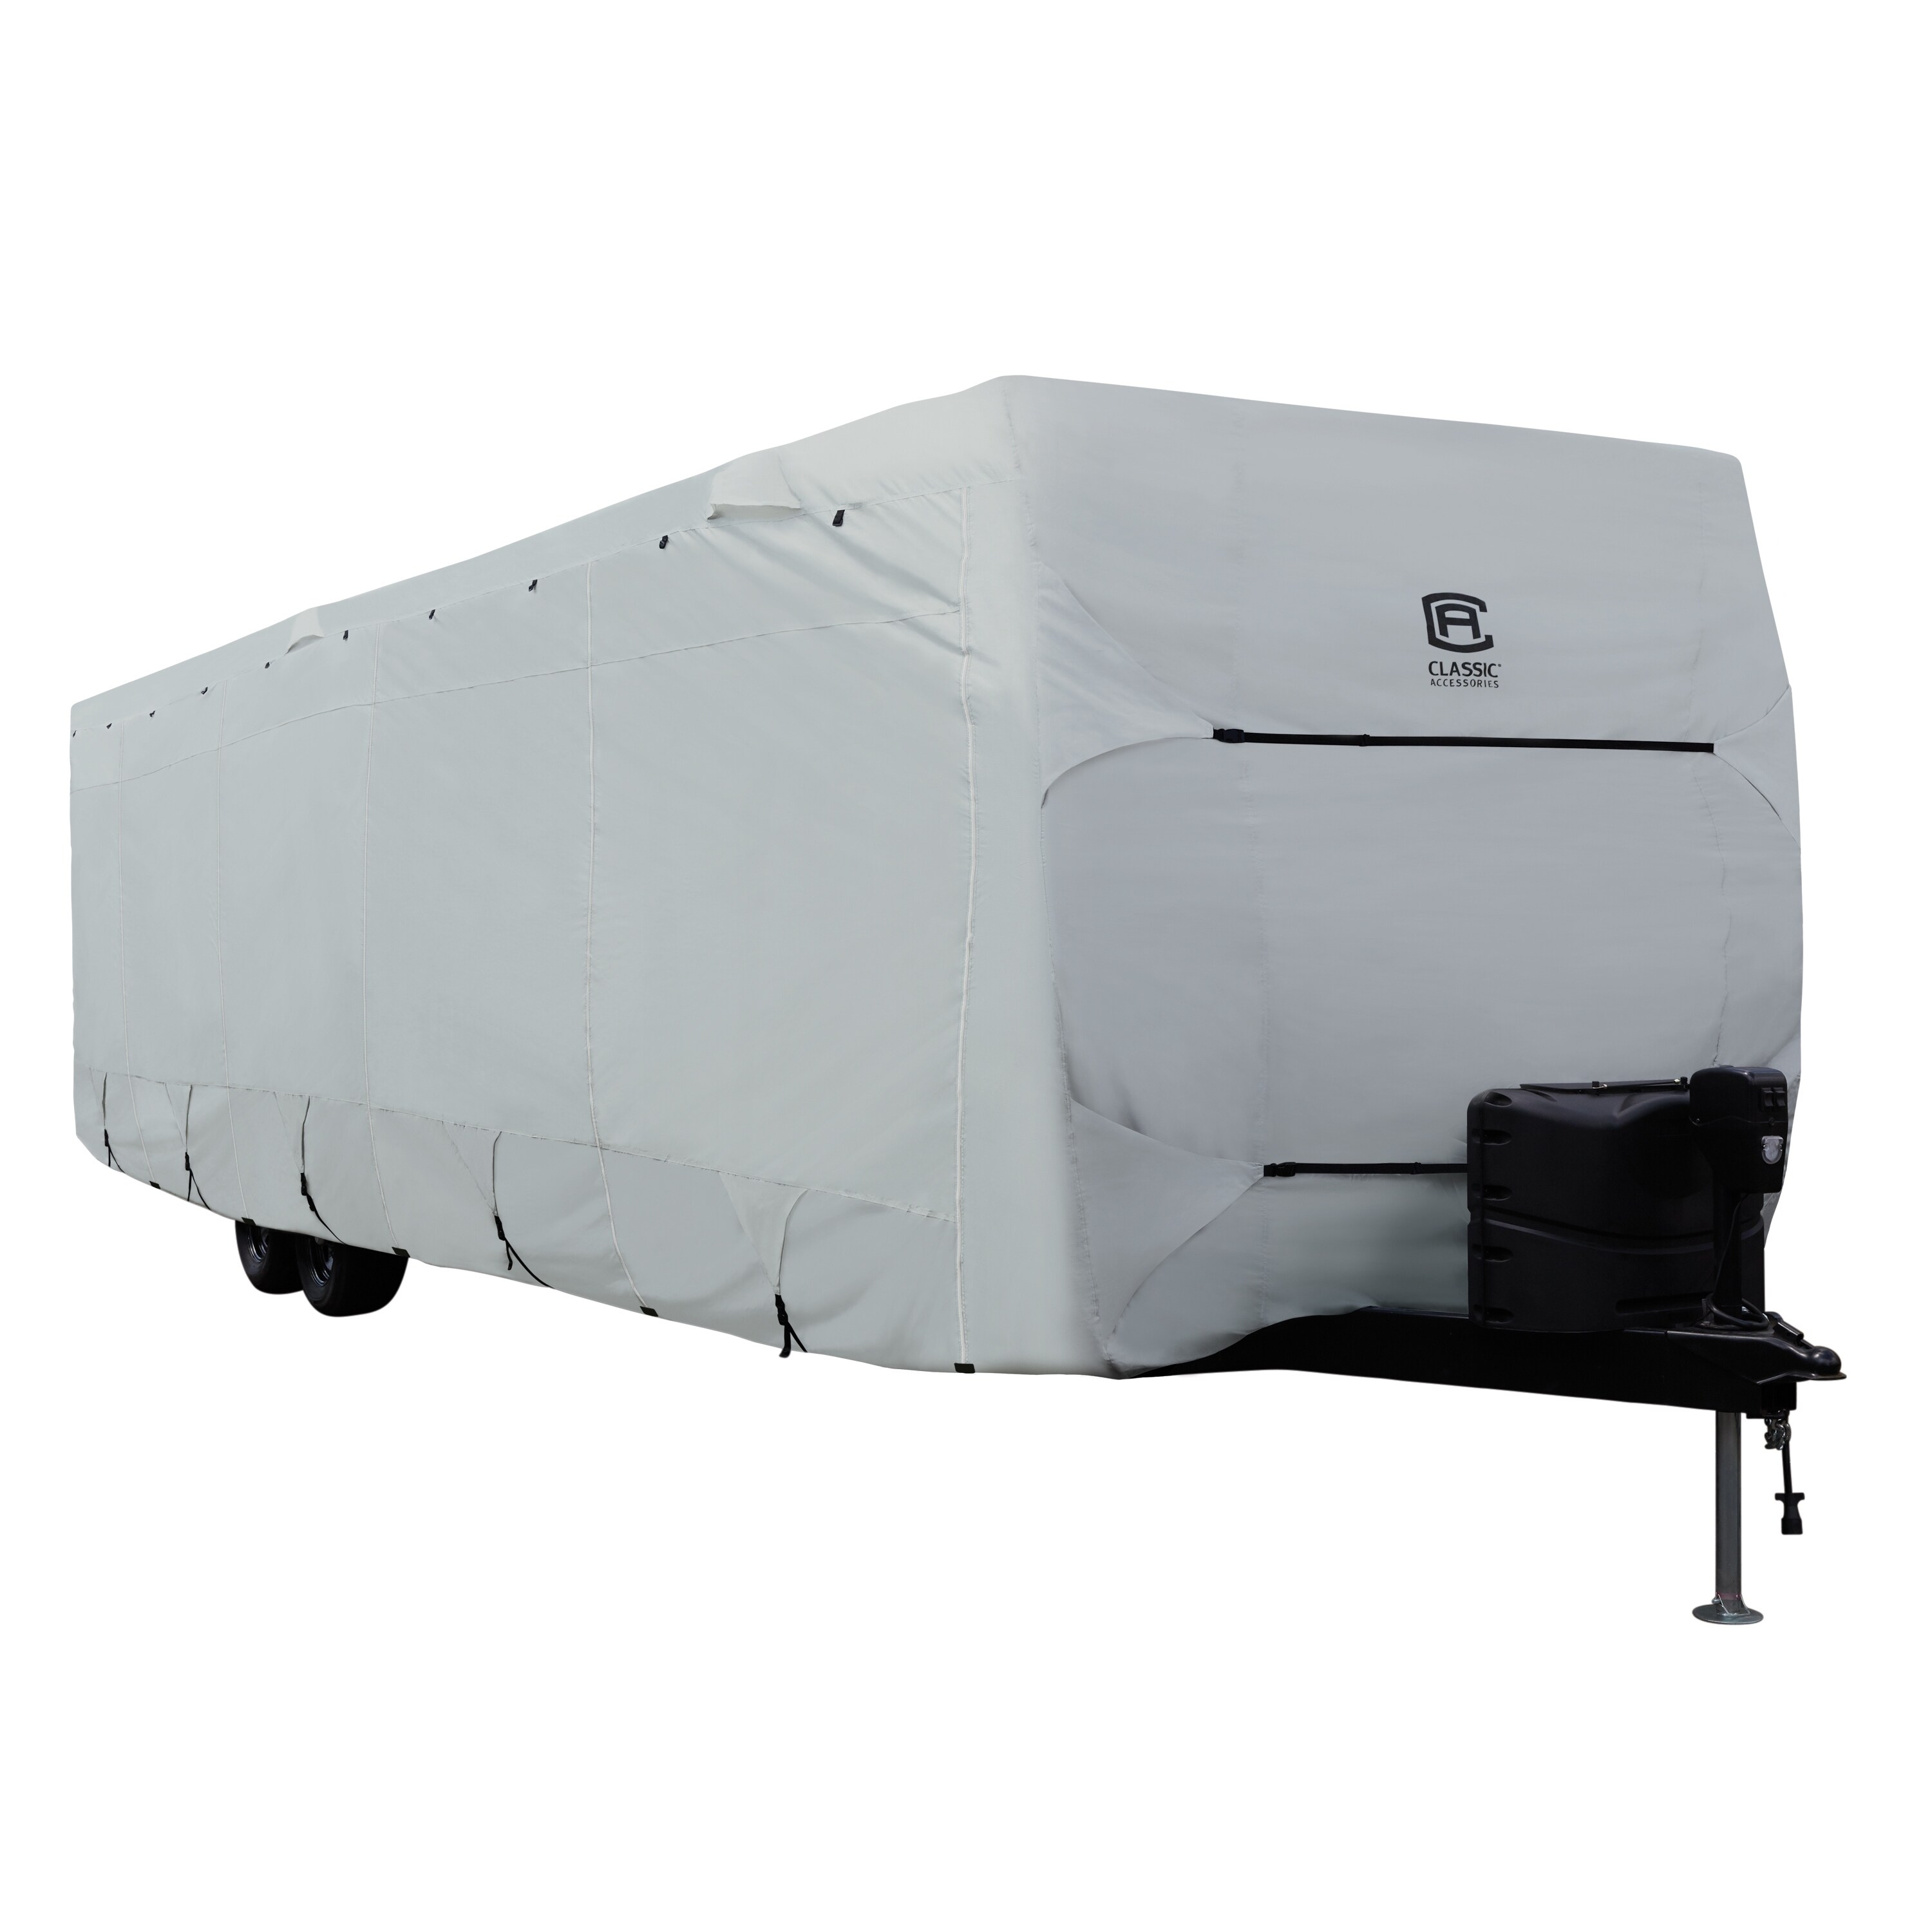 Classic Accessories Over Drive PermaPRO™ Deluxe Water-Repellent Travel Trailer Cover, Fits 35' - 38' RVs